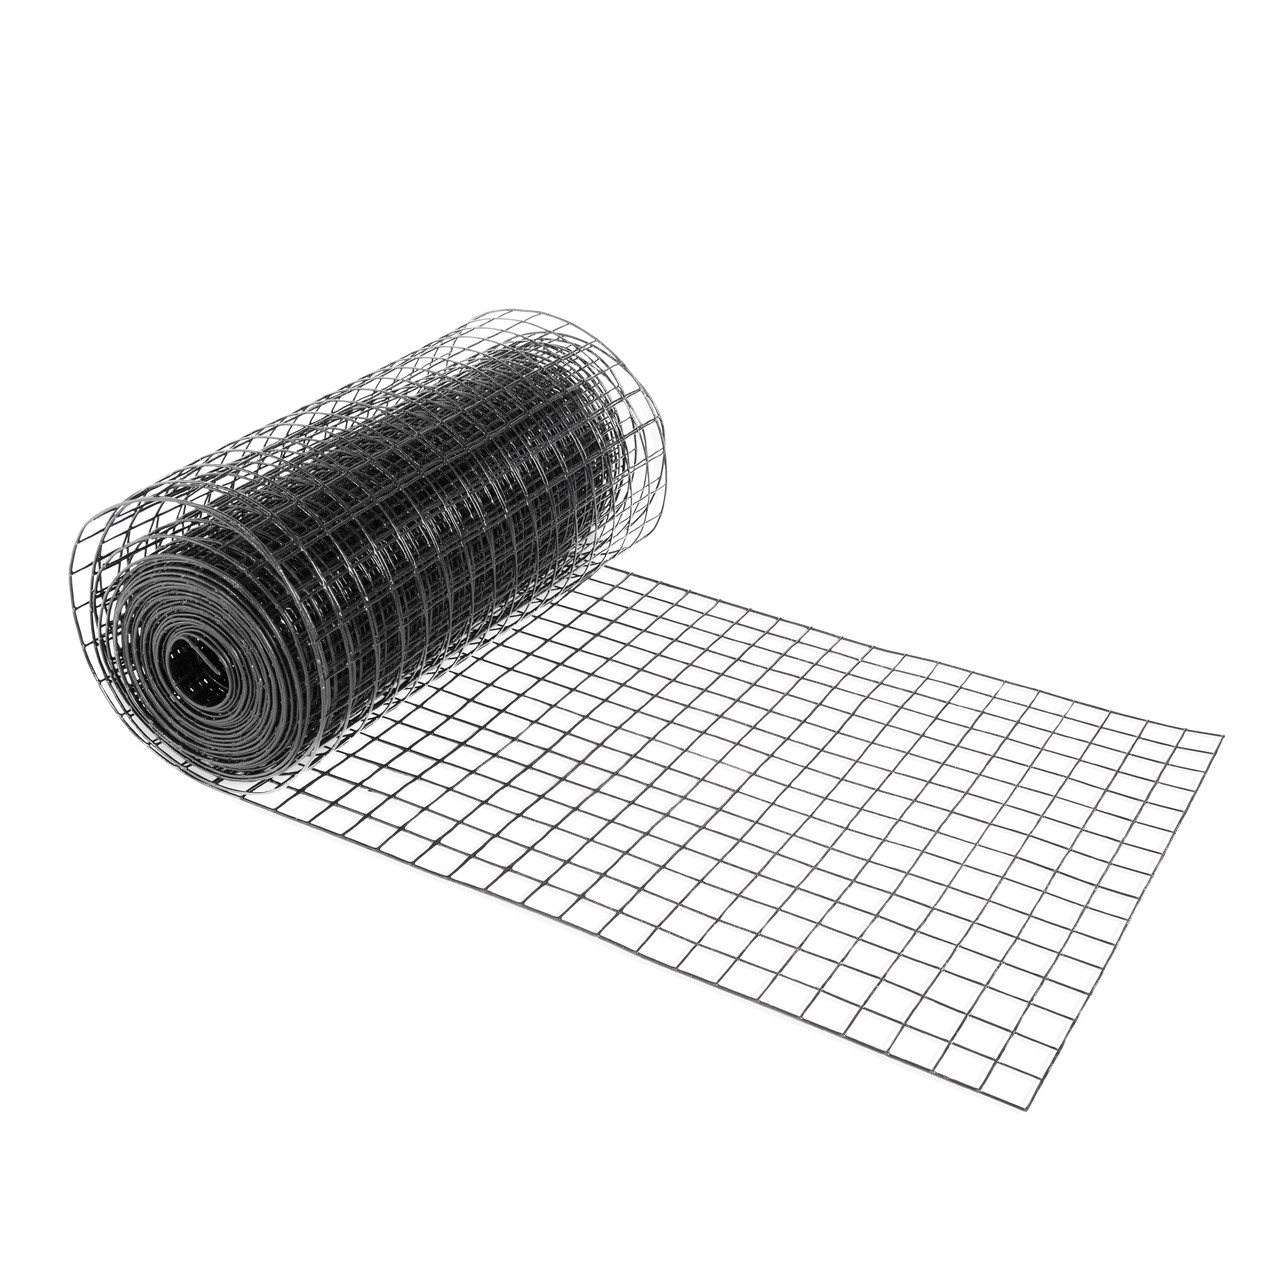 16 Gauge Black Vinyl Coated Welded Wire Mesh Size 1.5 inch by 1.5 inch -  FencerWire